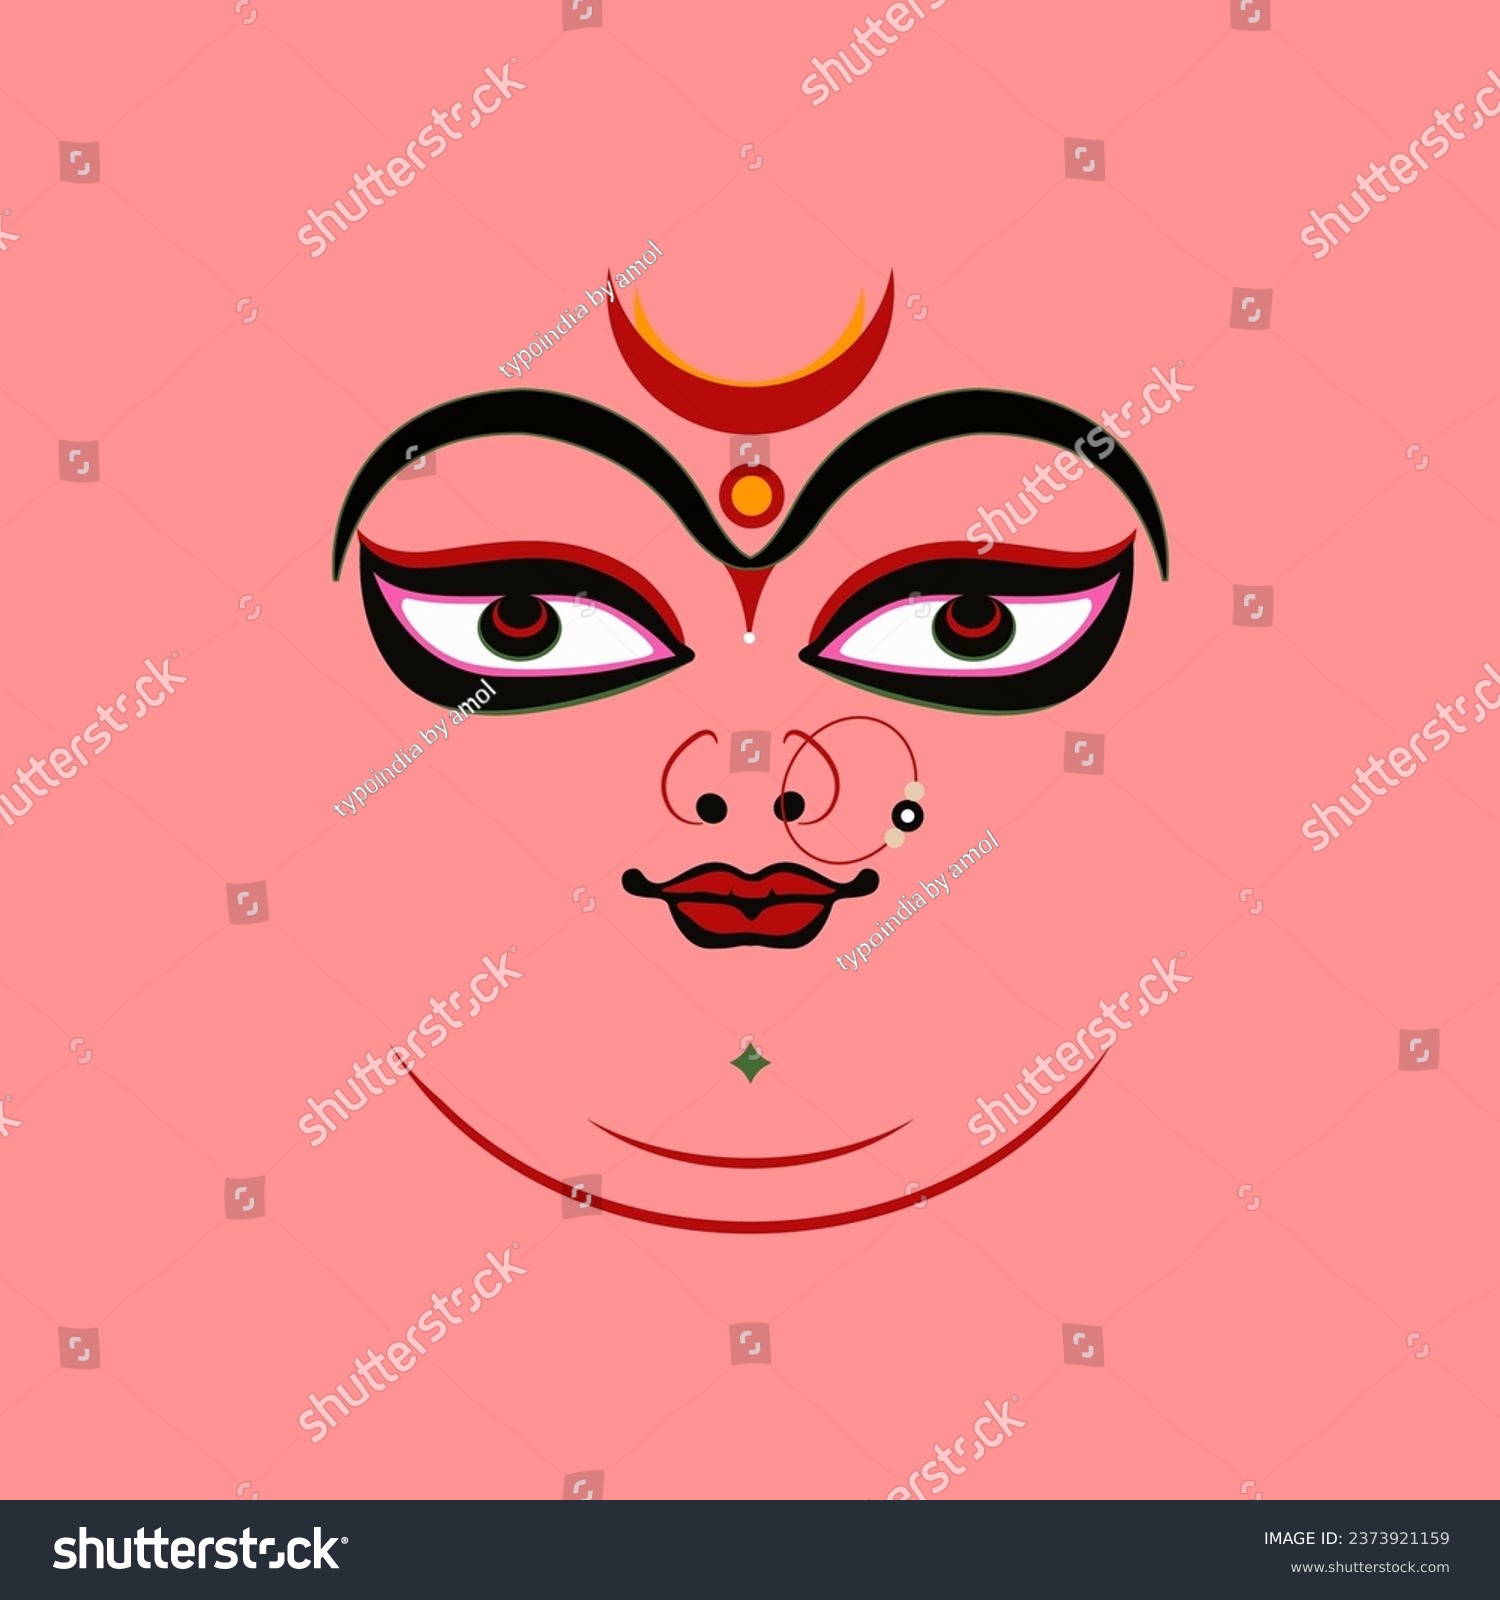 SVG of The lord Durga in Kolkata style face vector illustration. svg